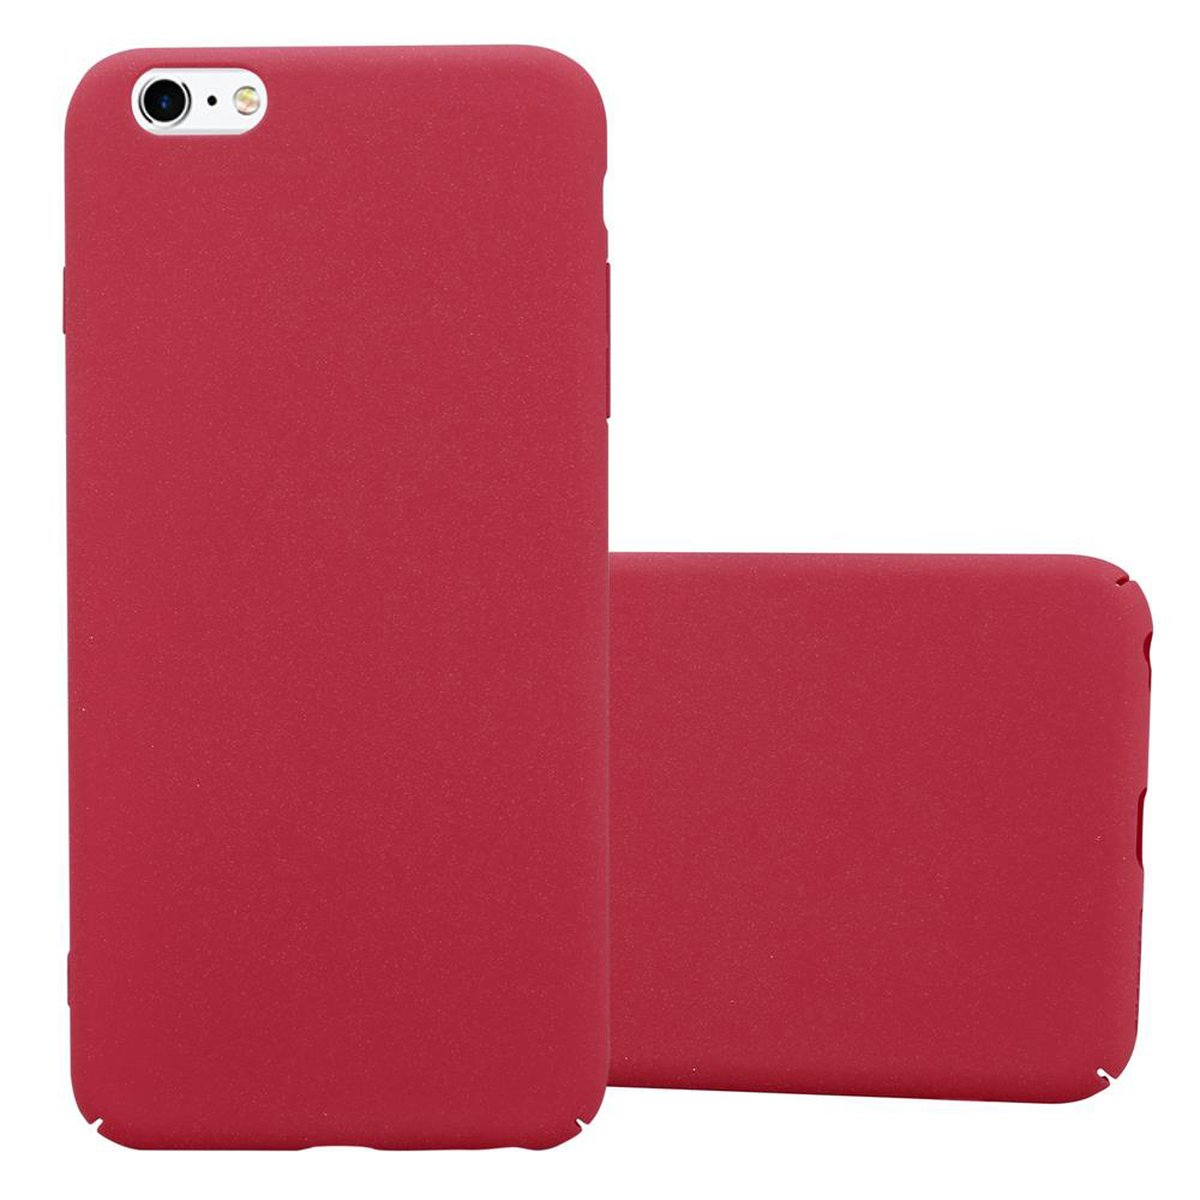 Style, CADORABO iPhone Hülle 6S PLUS, PLUS Hard 6 Apple, im ROT Backcover, Frosty FROSTY / Case